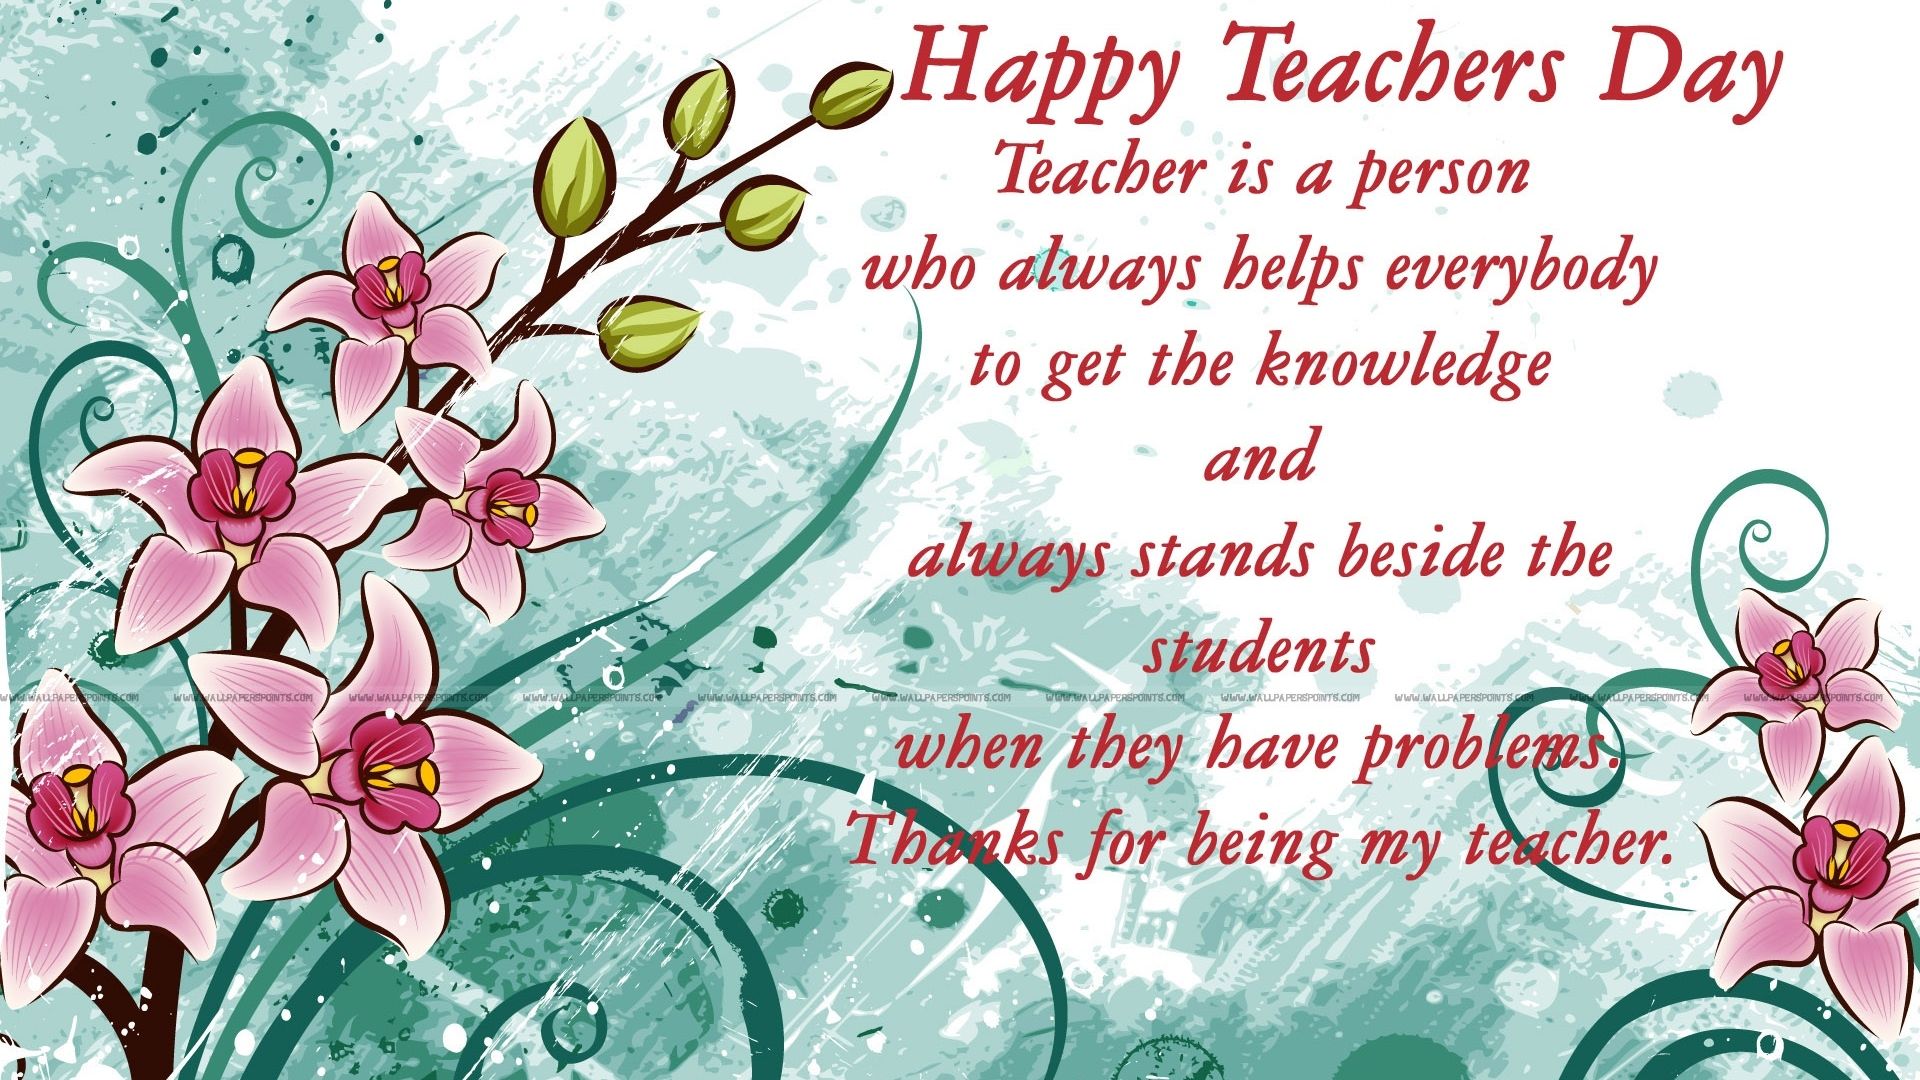 Free download Happy Teachers Day HD Image Wallpaper Pics and Photo [1920x1200] for your Desktop, Mobile & Tablet. Explore World Teacher's Day Wallpaper. World Teacher's Day Wallpaper, World Environment